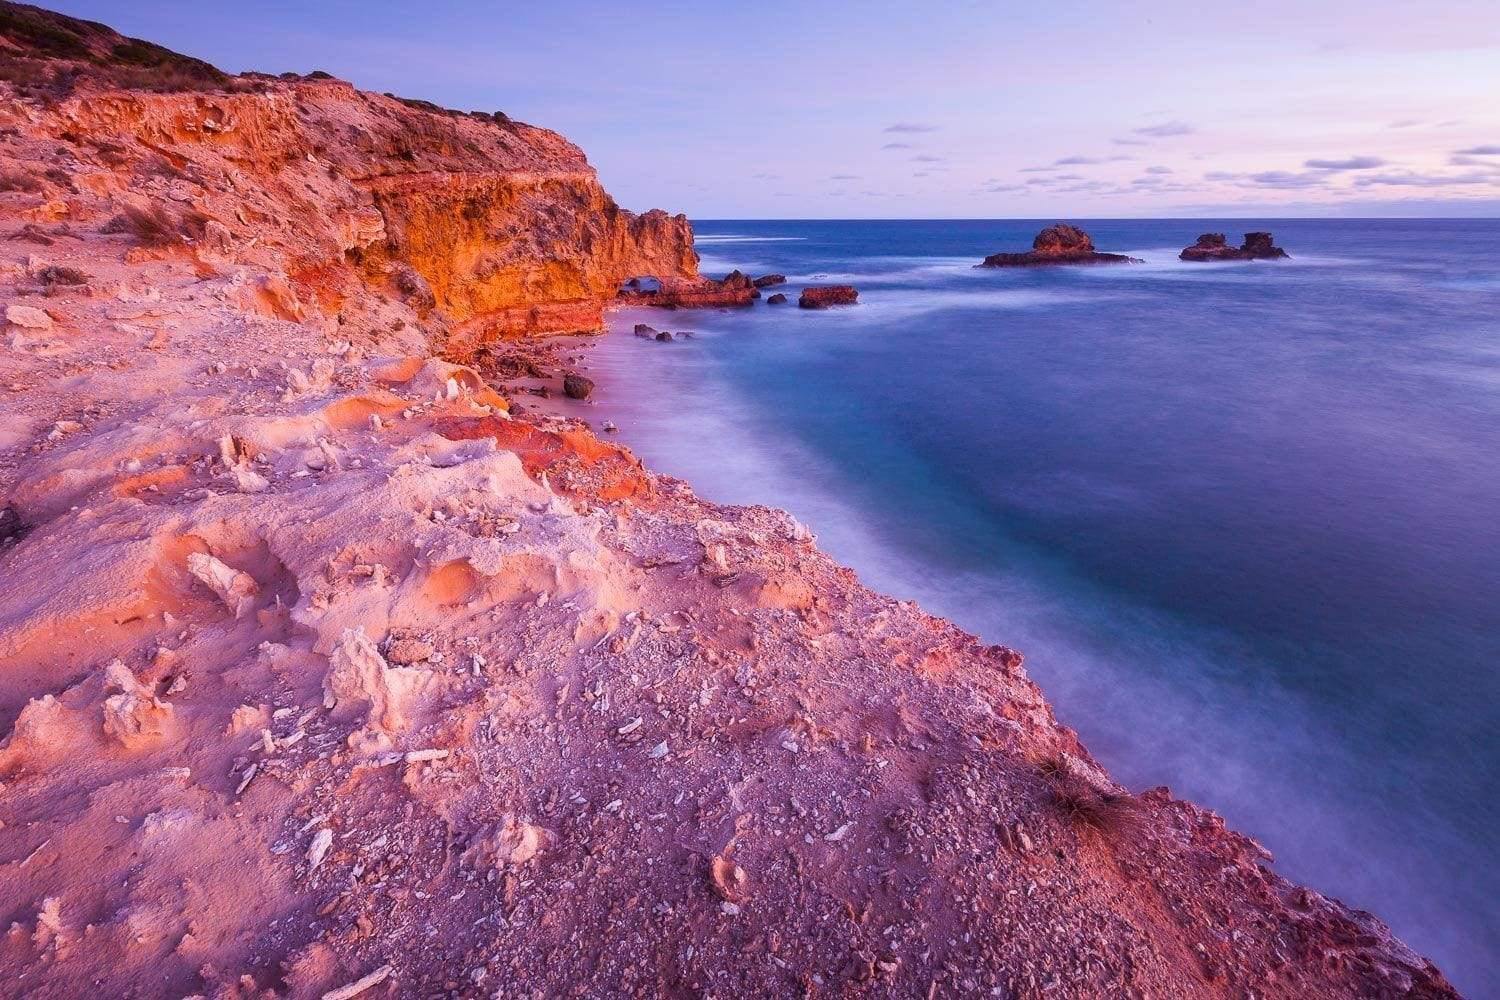 A morning view of a giant mountain wall with a seashore connecting to it, some big mounts are standing in the water in the far background, Bay of islands - Mornington Peninsula Victoria 